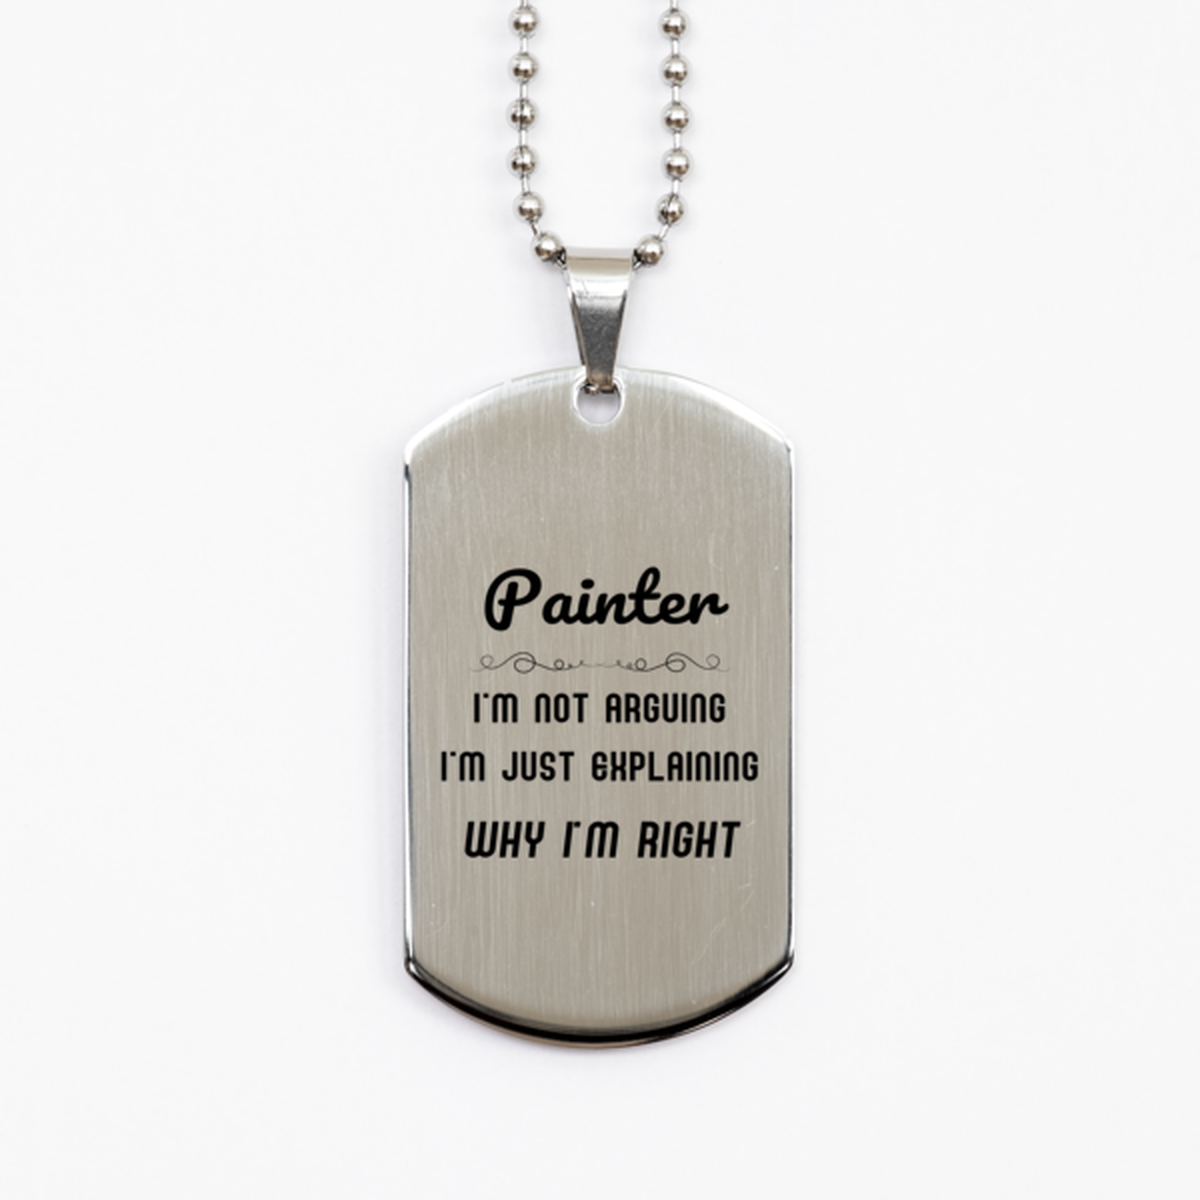 Painter I'm not Arguing. I'm Just Explaining Why I'm RIGHT Silver Dog Tag, Funny Saying Quote Painter Gifts For Painter Graduation Birthday Christmas Gifts for Men Women Coworker